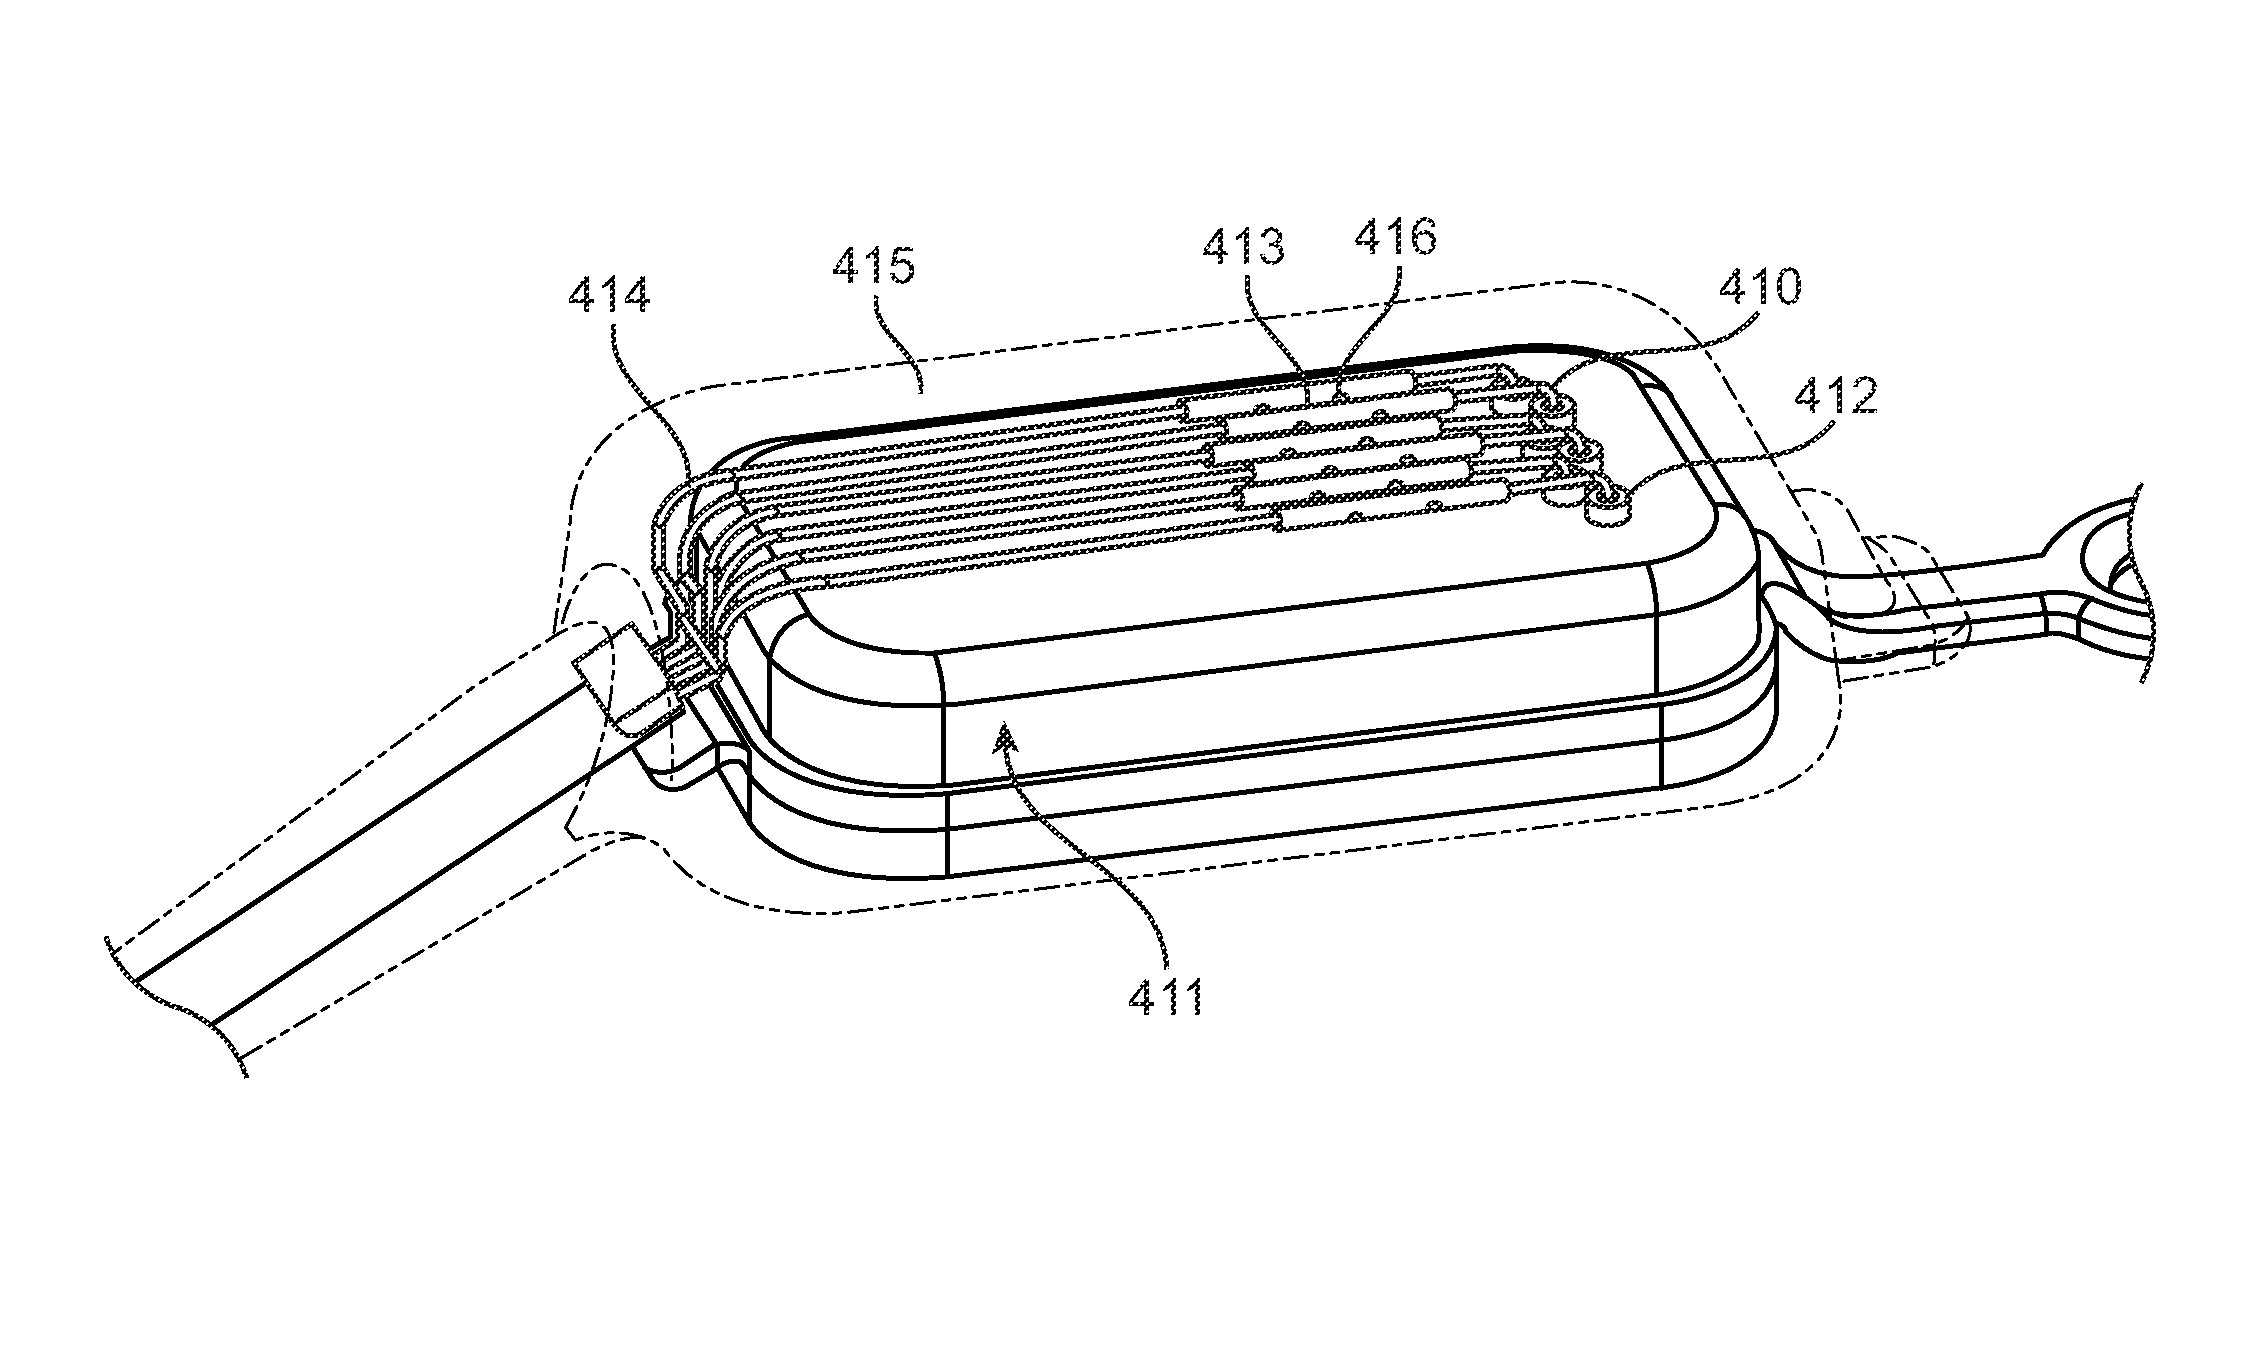 Implantable neurostimulator with integral hermetic electronic enclosure, circuit substrate, monolithic feed-through, lead assembly and anchoring mechanism